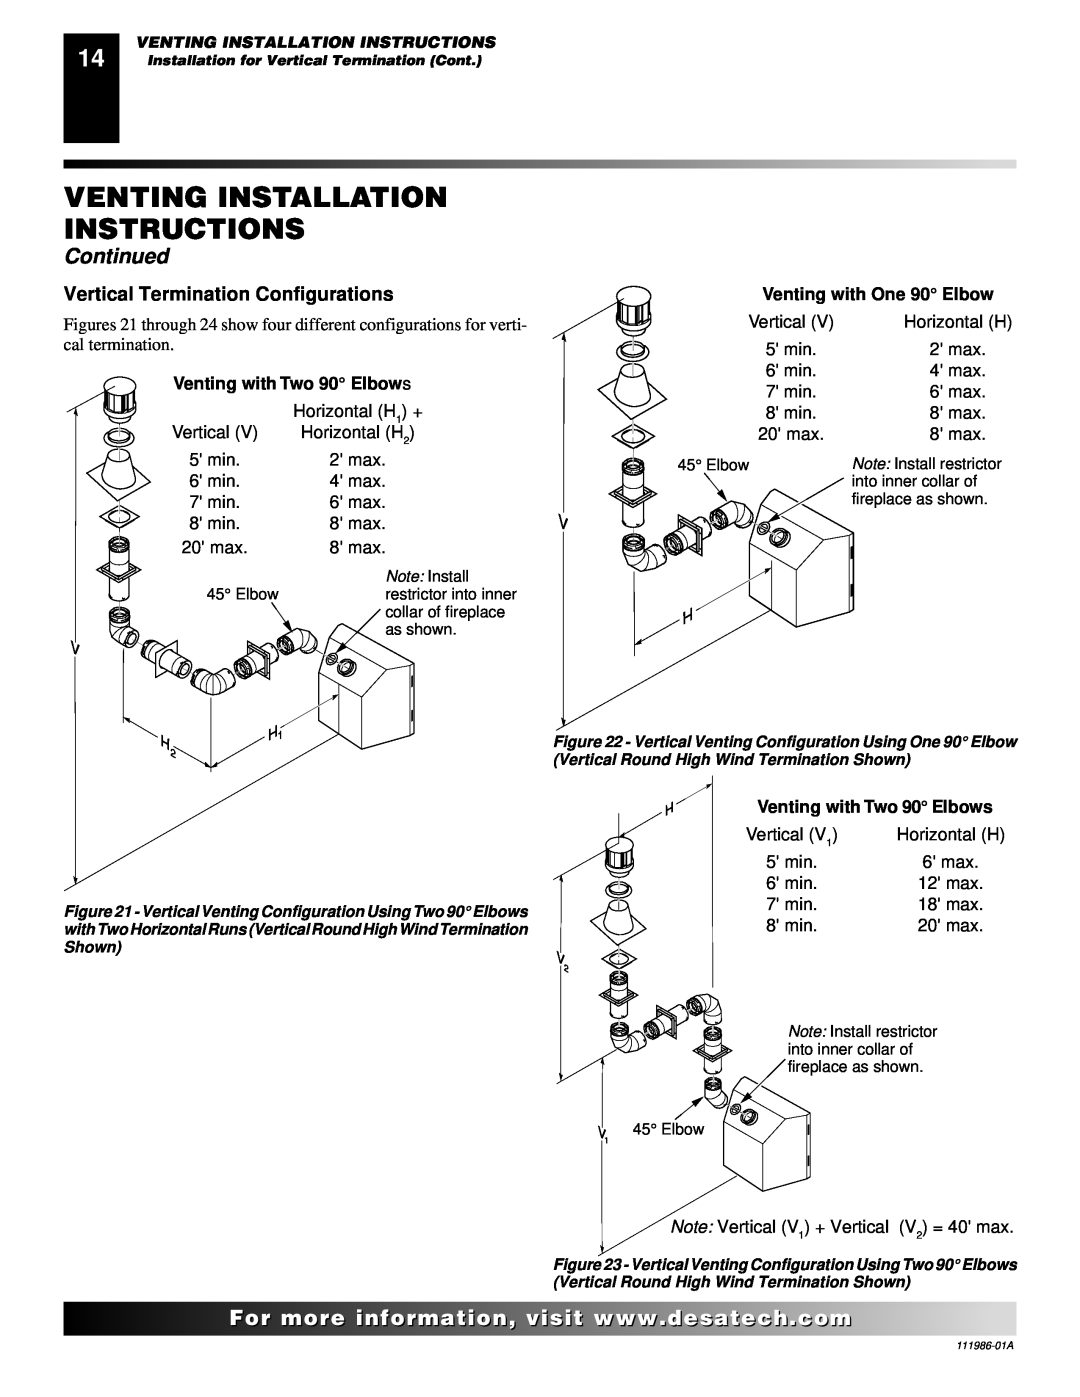 Desa T32P Vertical Termination Configurations, Venting with One 90 Elbow, Venting Installation Instructions, Continued 